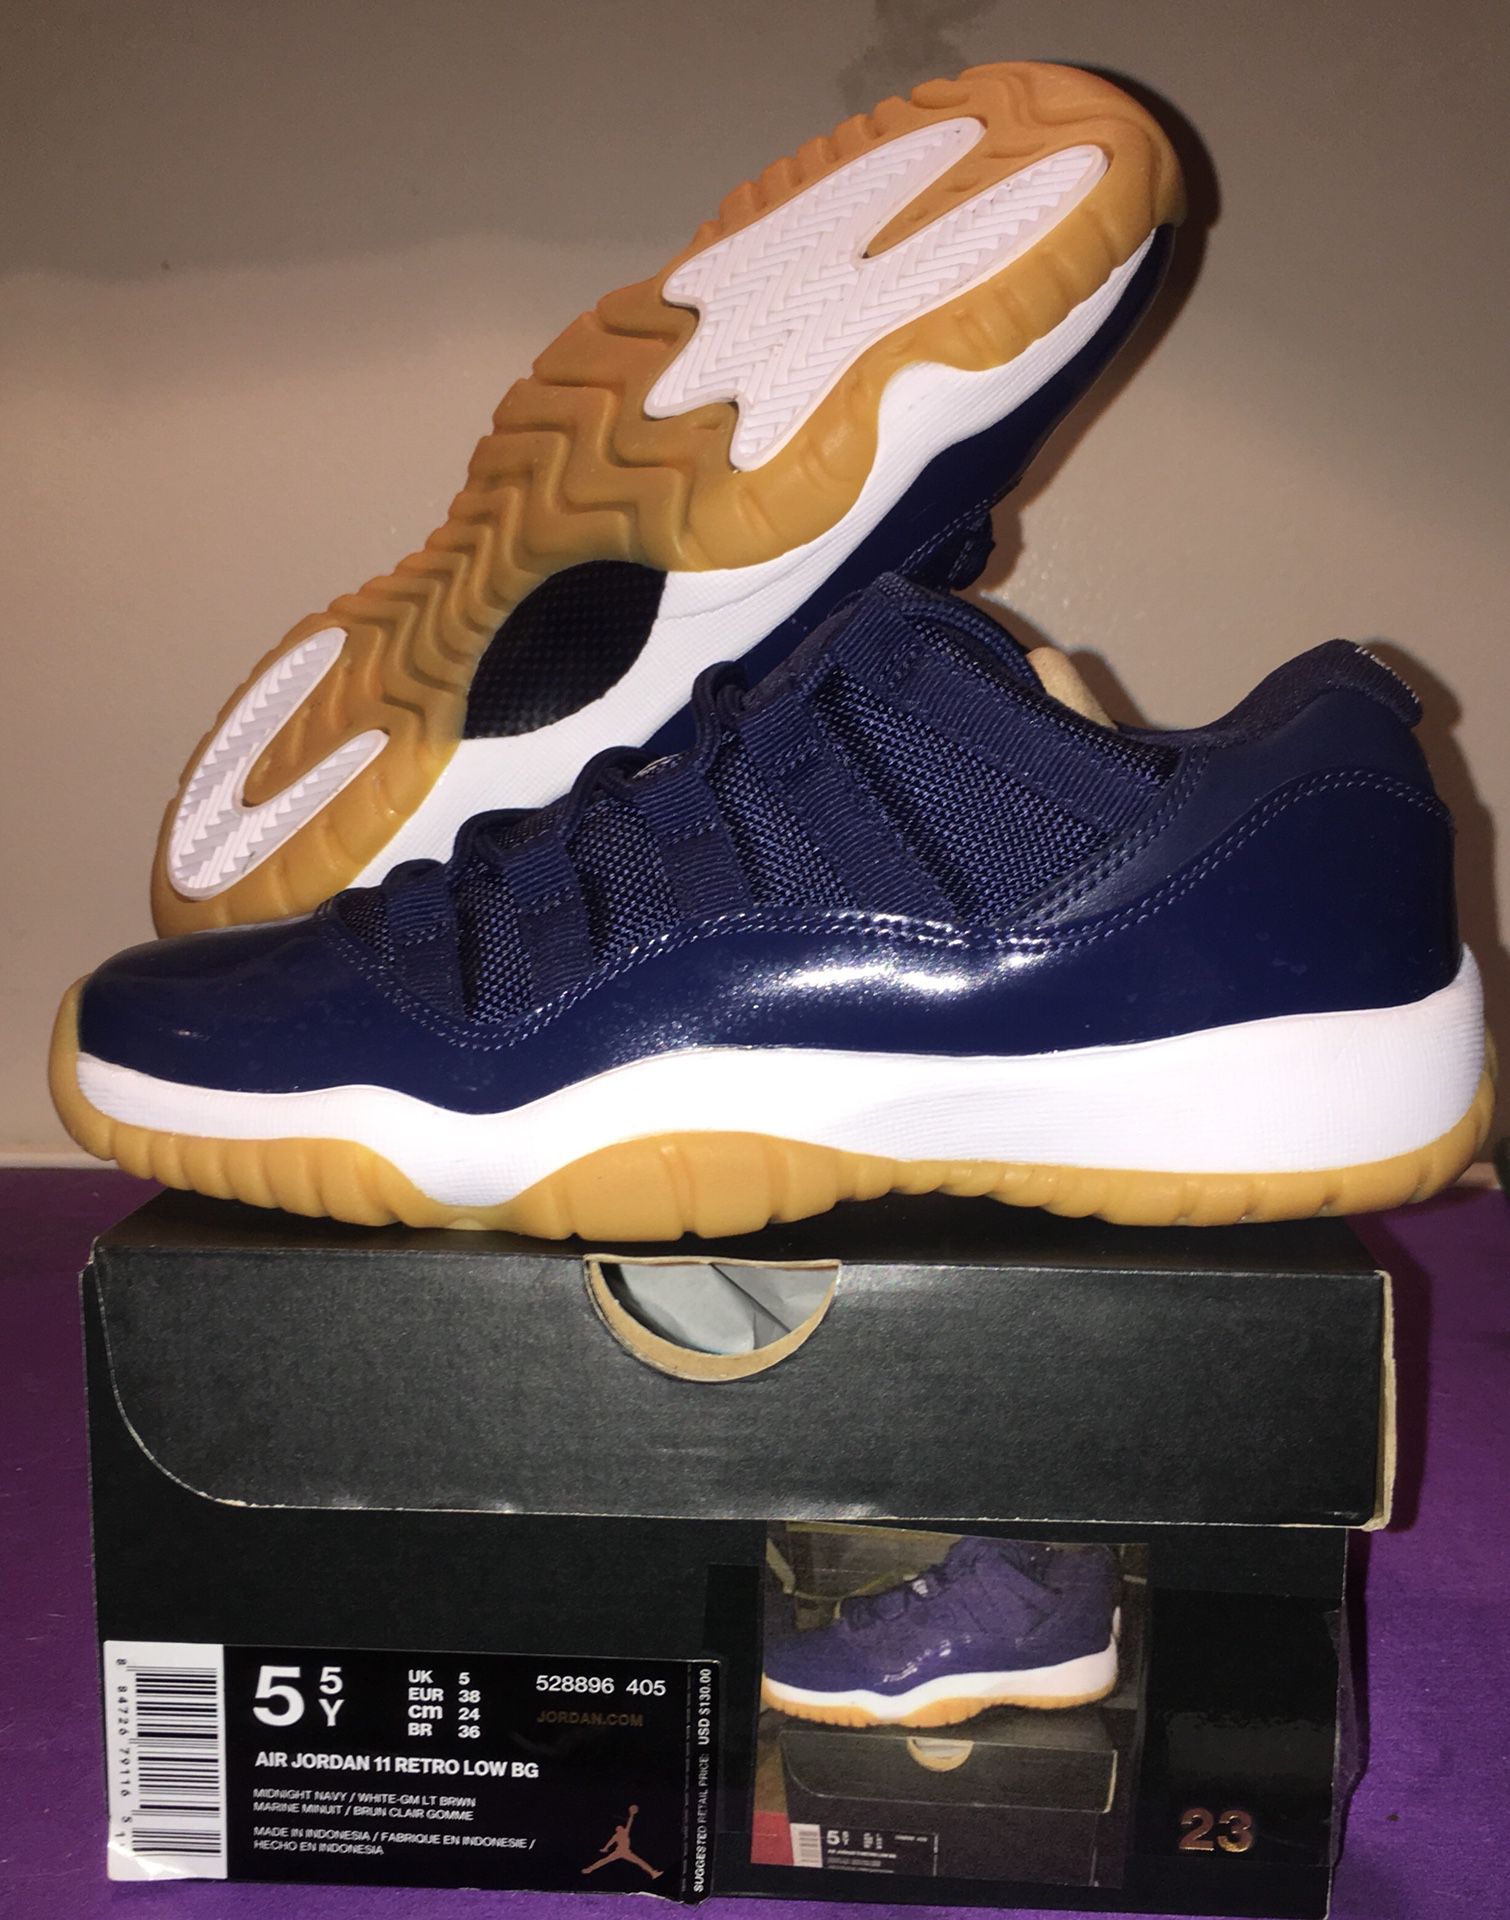 DS Jordan 11 low baby gum bottom youth size 5.5